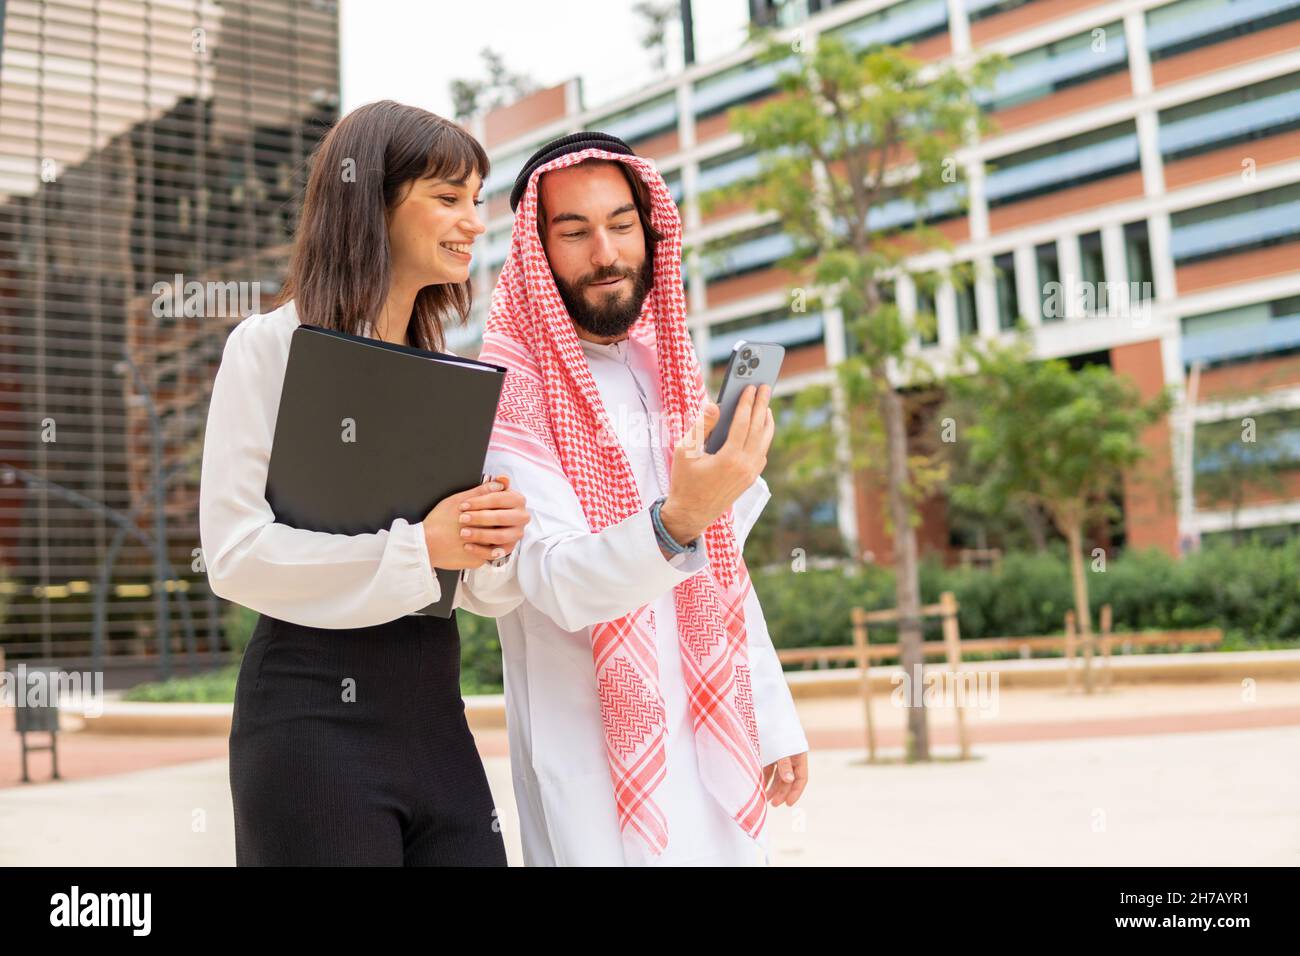 Two diverse business partners arab man and caucasian woman watching video on smartphone during meeting in city, arab man in traditional wear and his female assistant using mobile phone outdoors Stock Photo